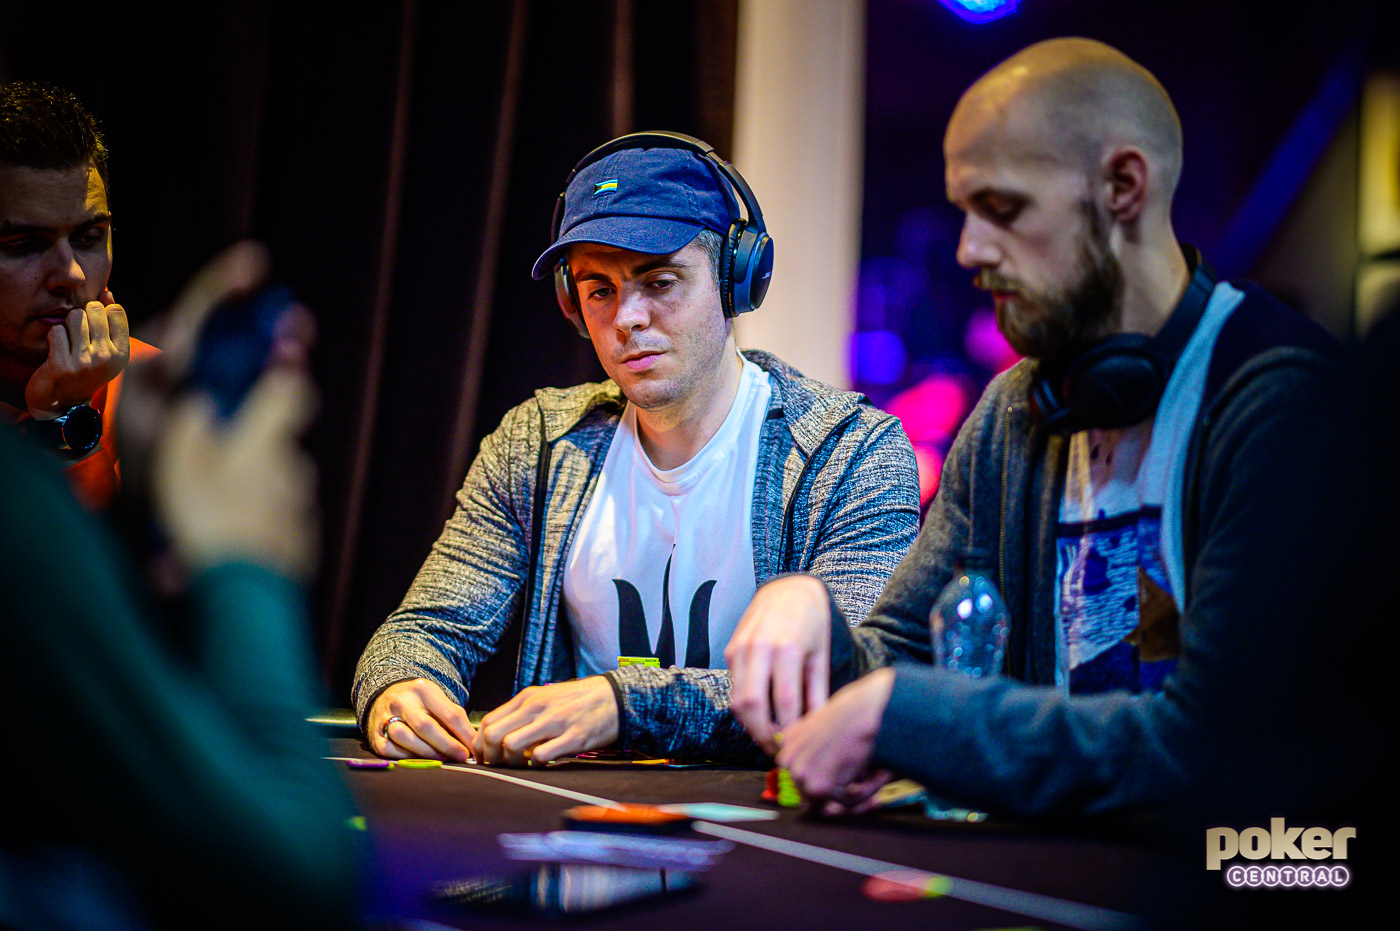 Ben Tollerne battling with Stephen Chidwick at the British Poker Open.